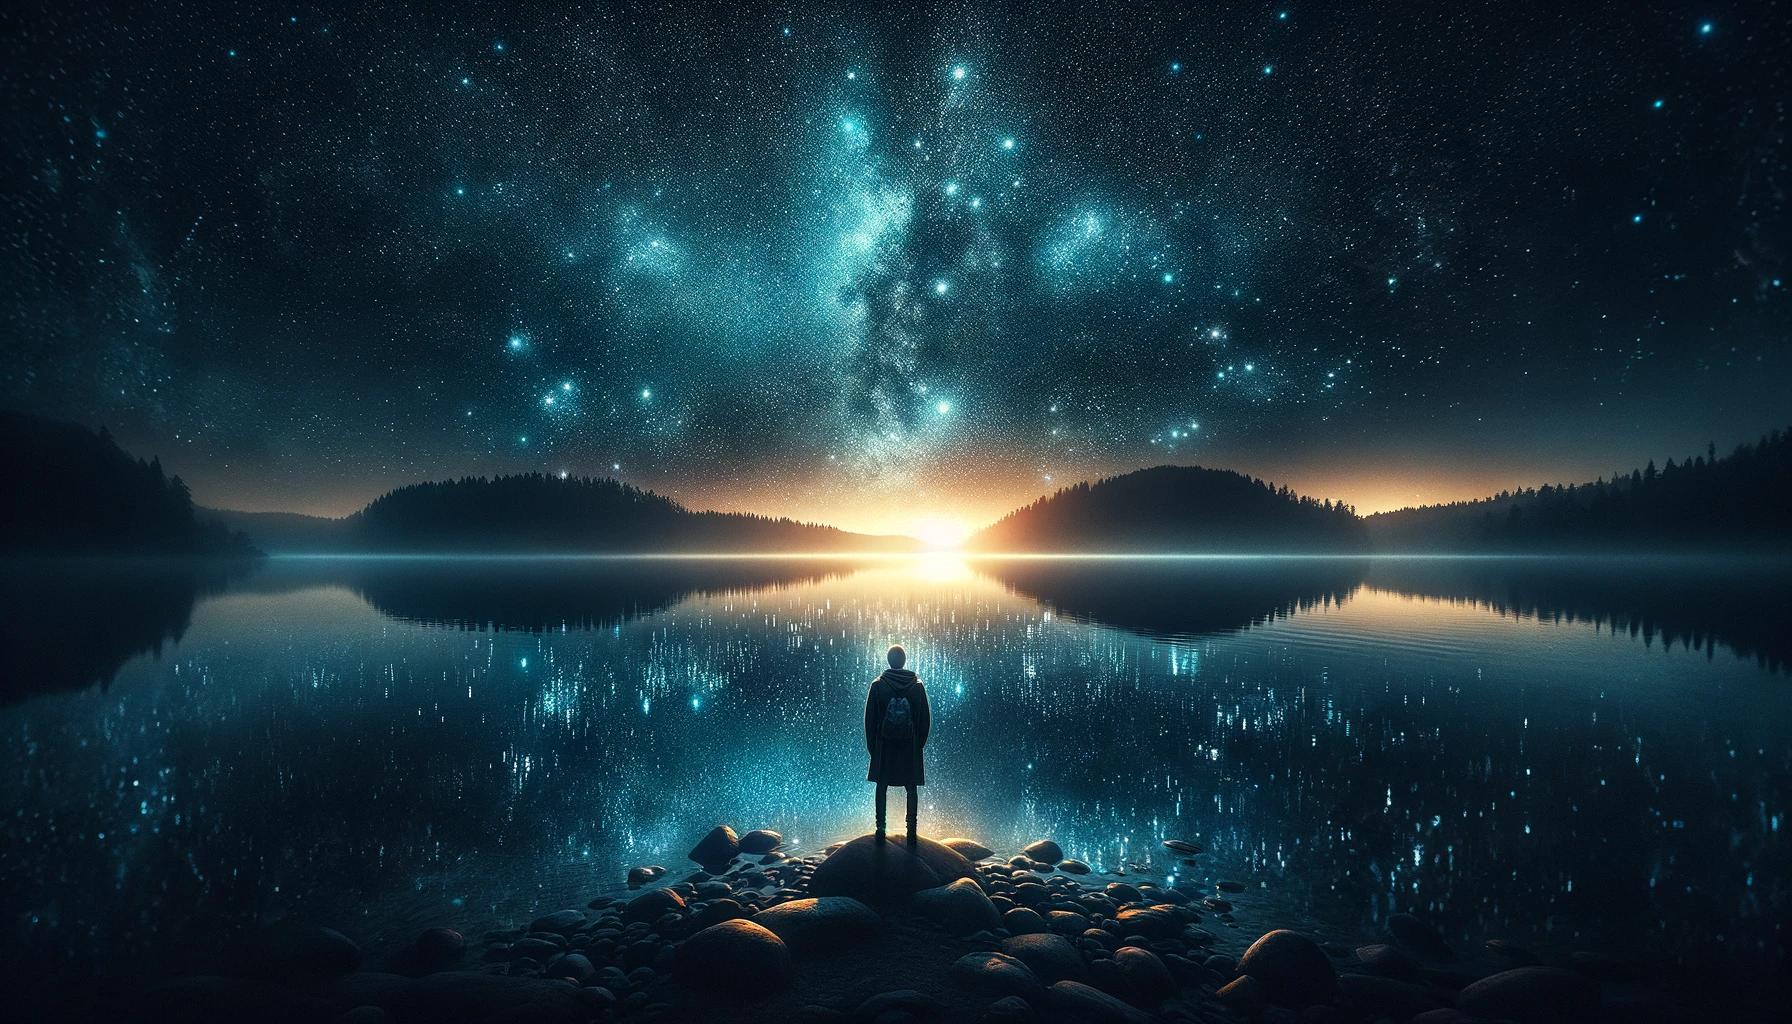 person standing at the edge of a serene lake, under the ethereal glow of a starry constellation in "The Painter of Dreams" bedtime story.